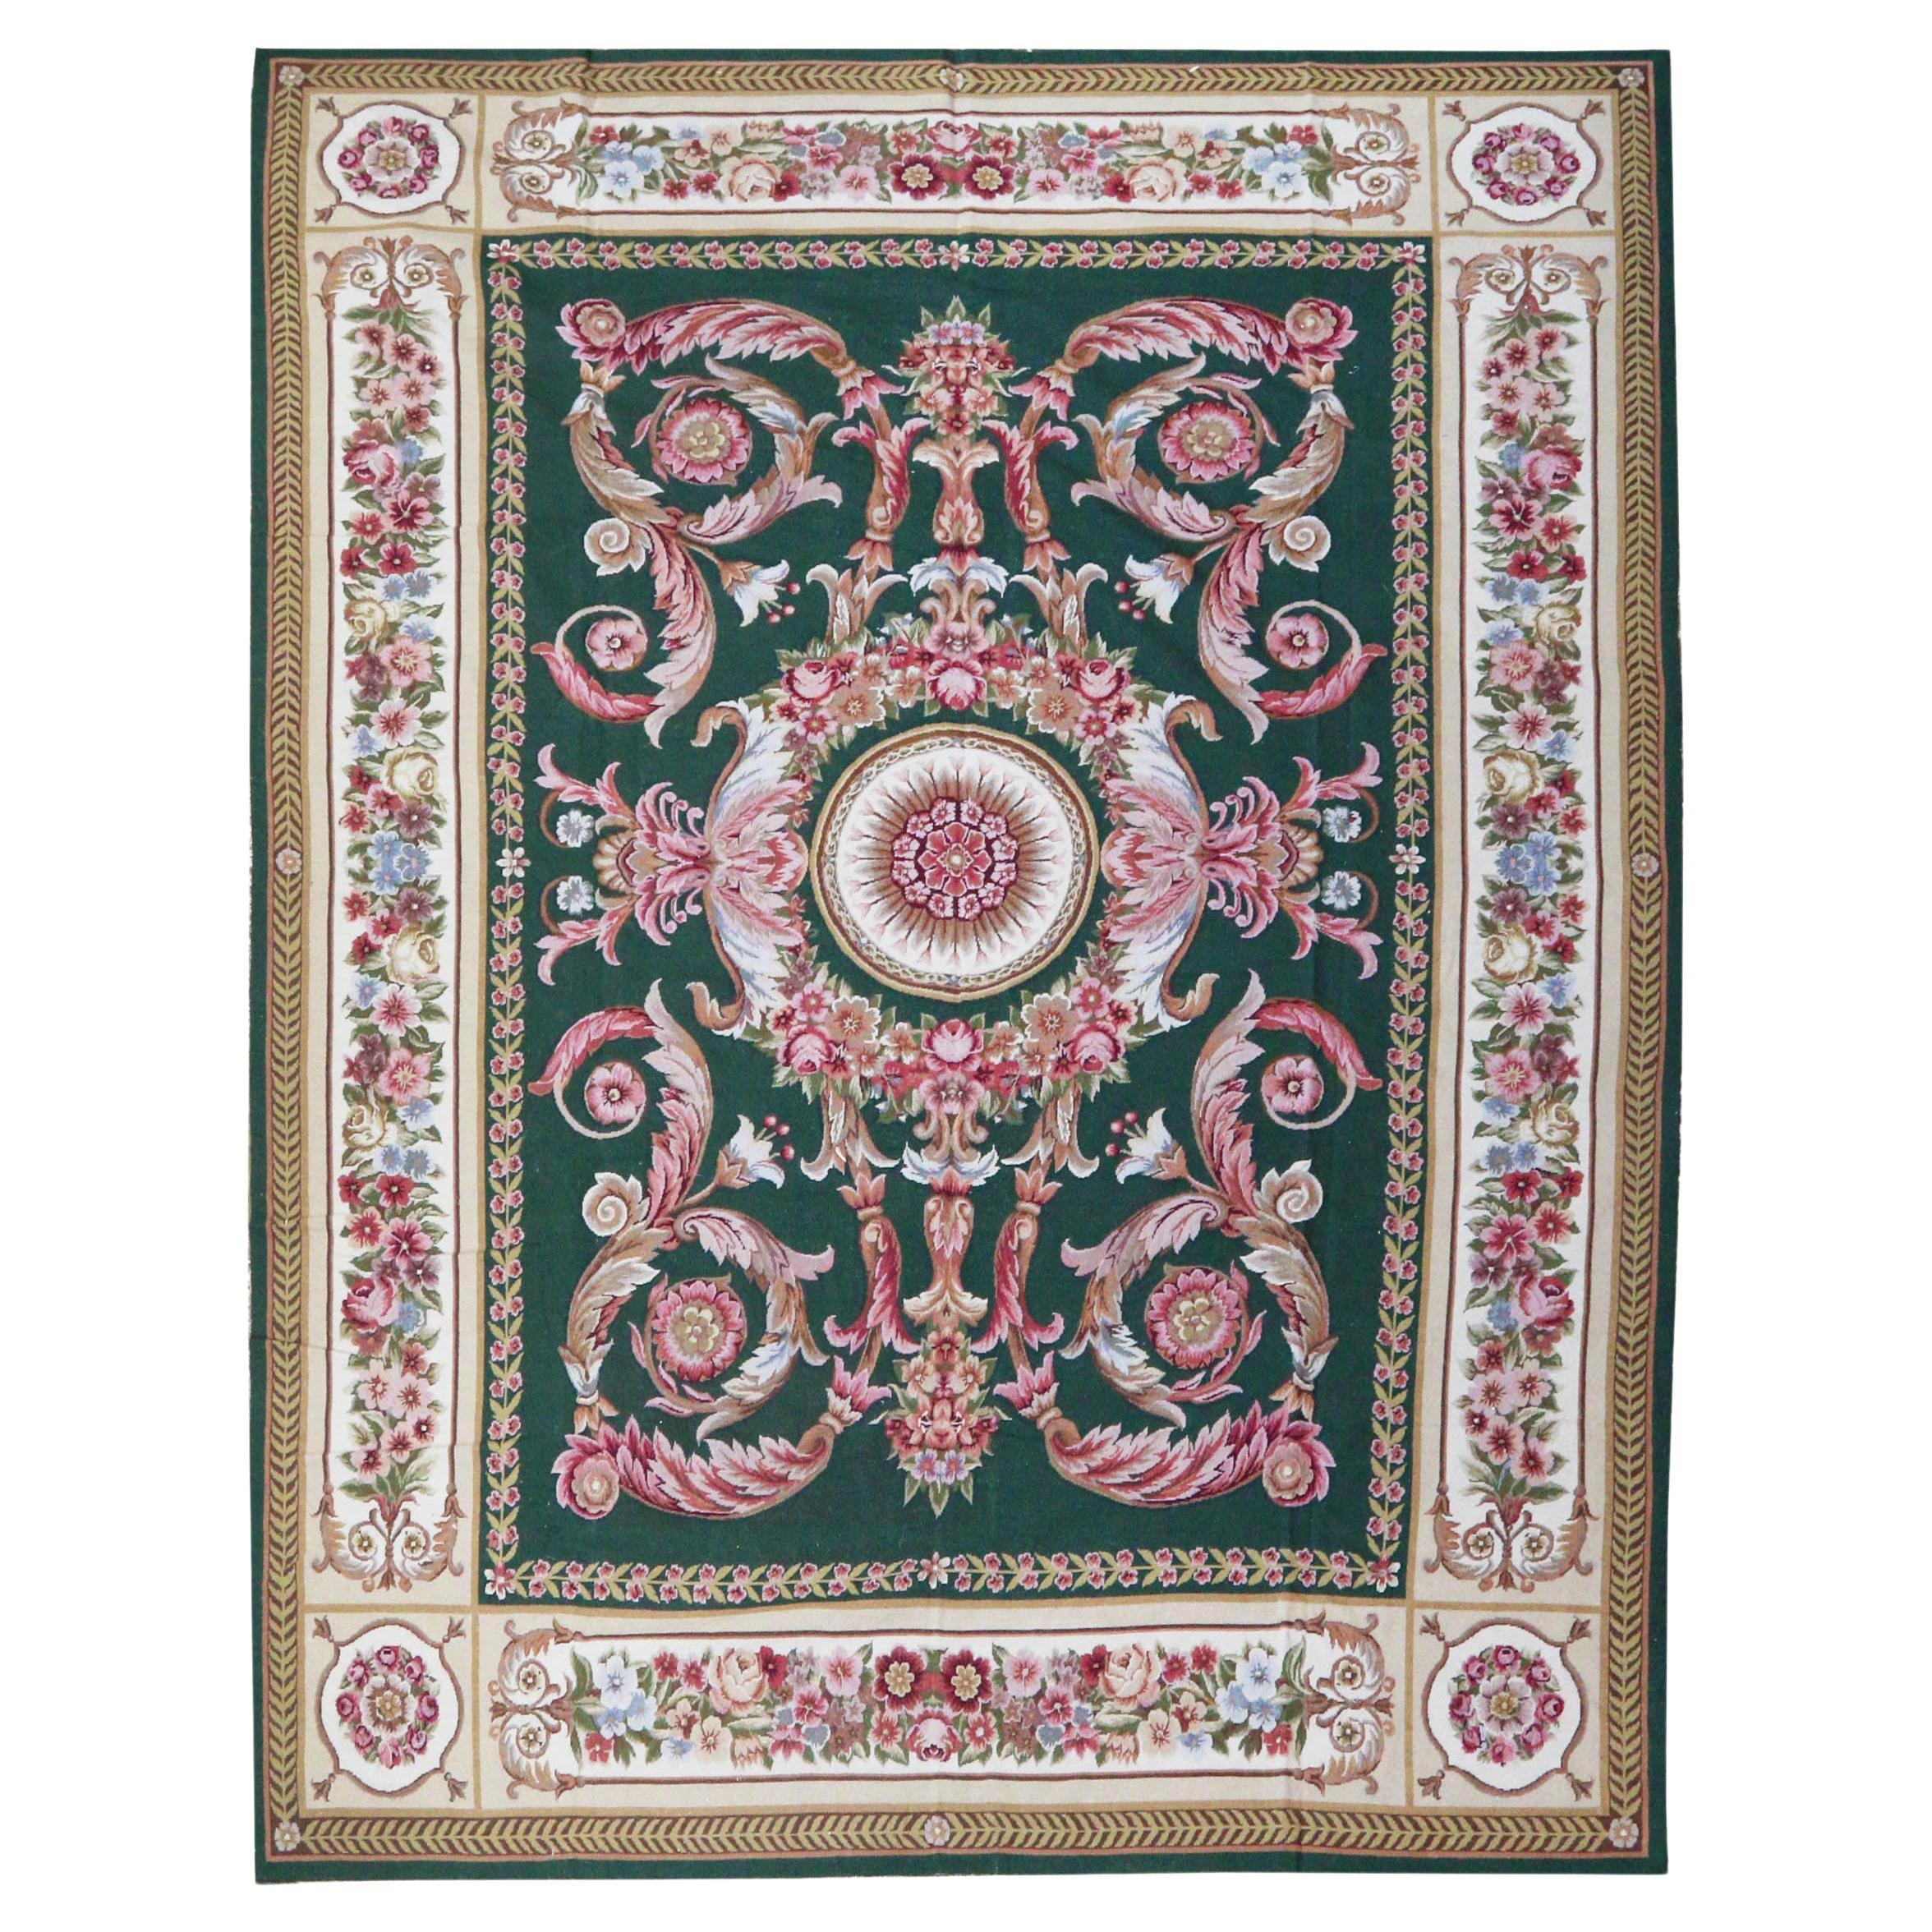 Empire Style Needlework Rug in Green and Pink